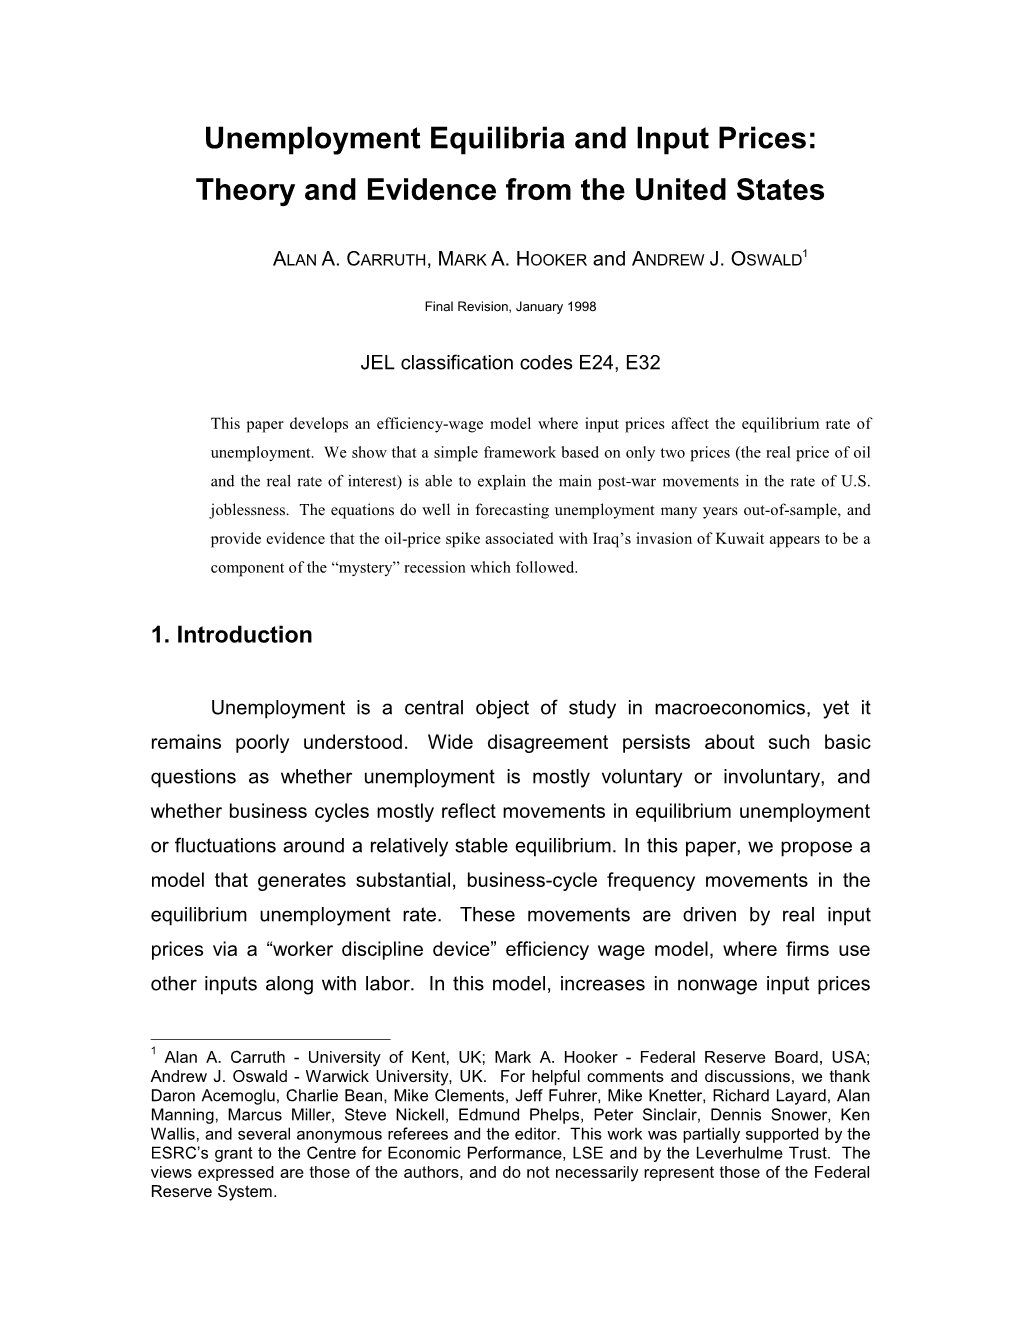 Unemployment Equilibria and Input Prices: Theory and Evidence from the United States